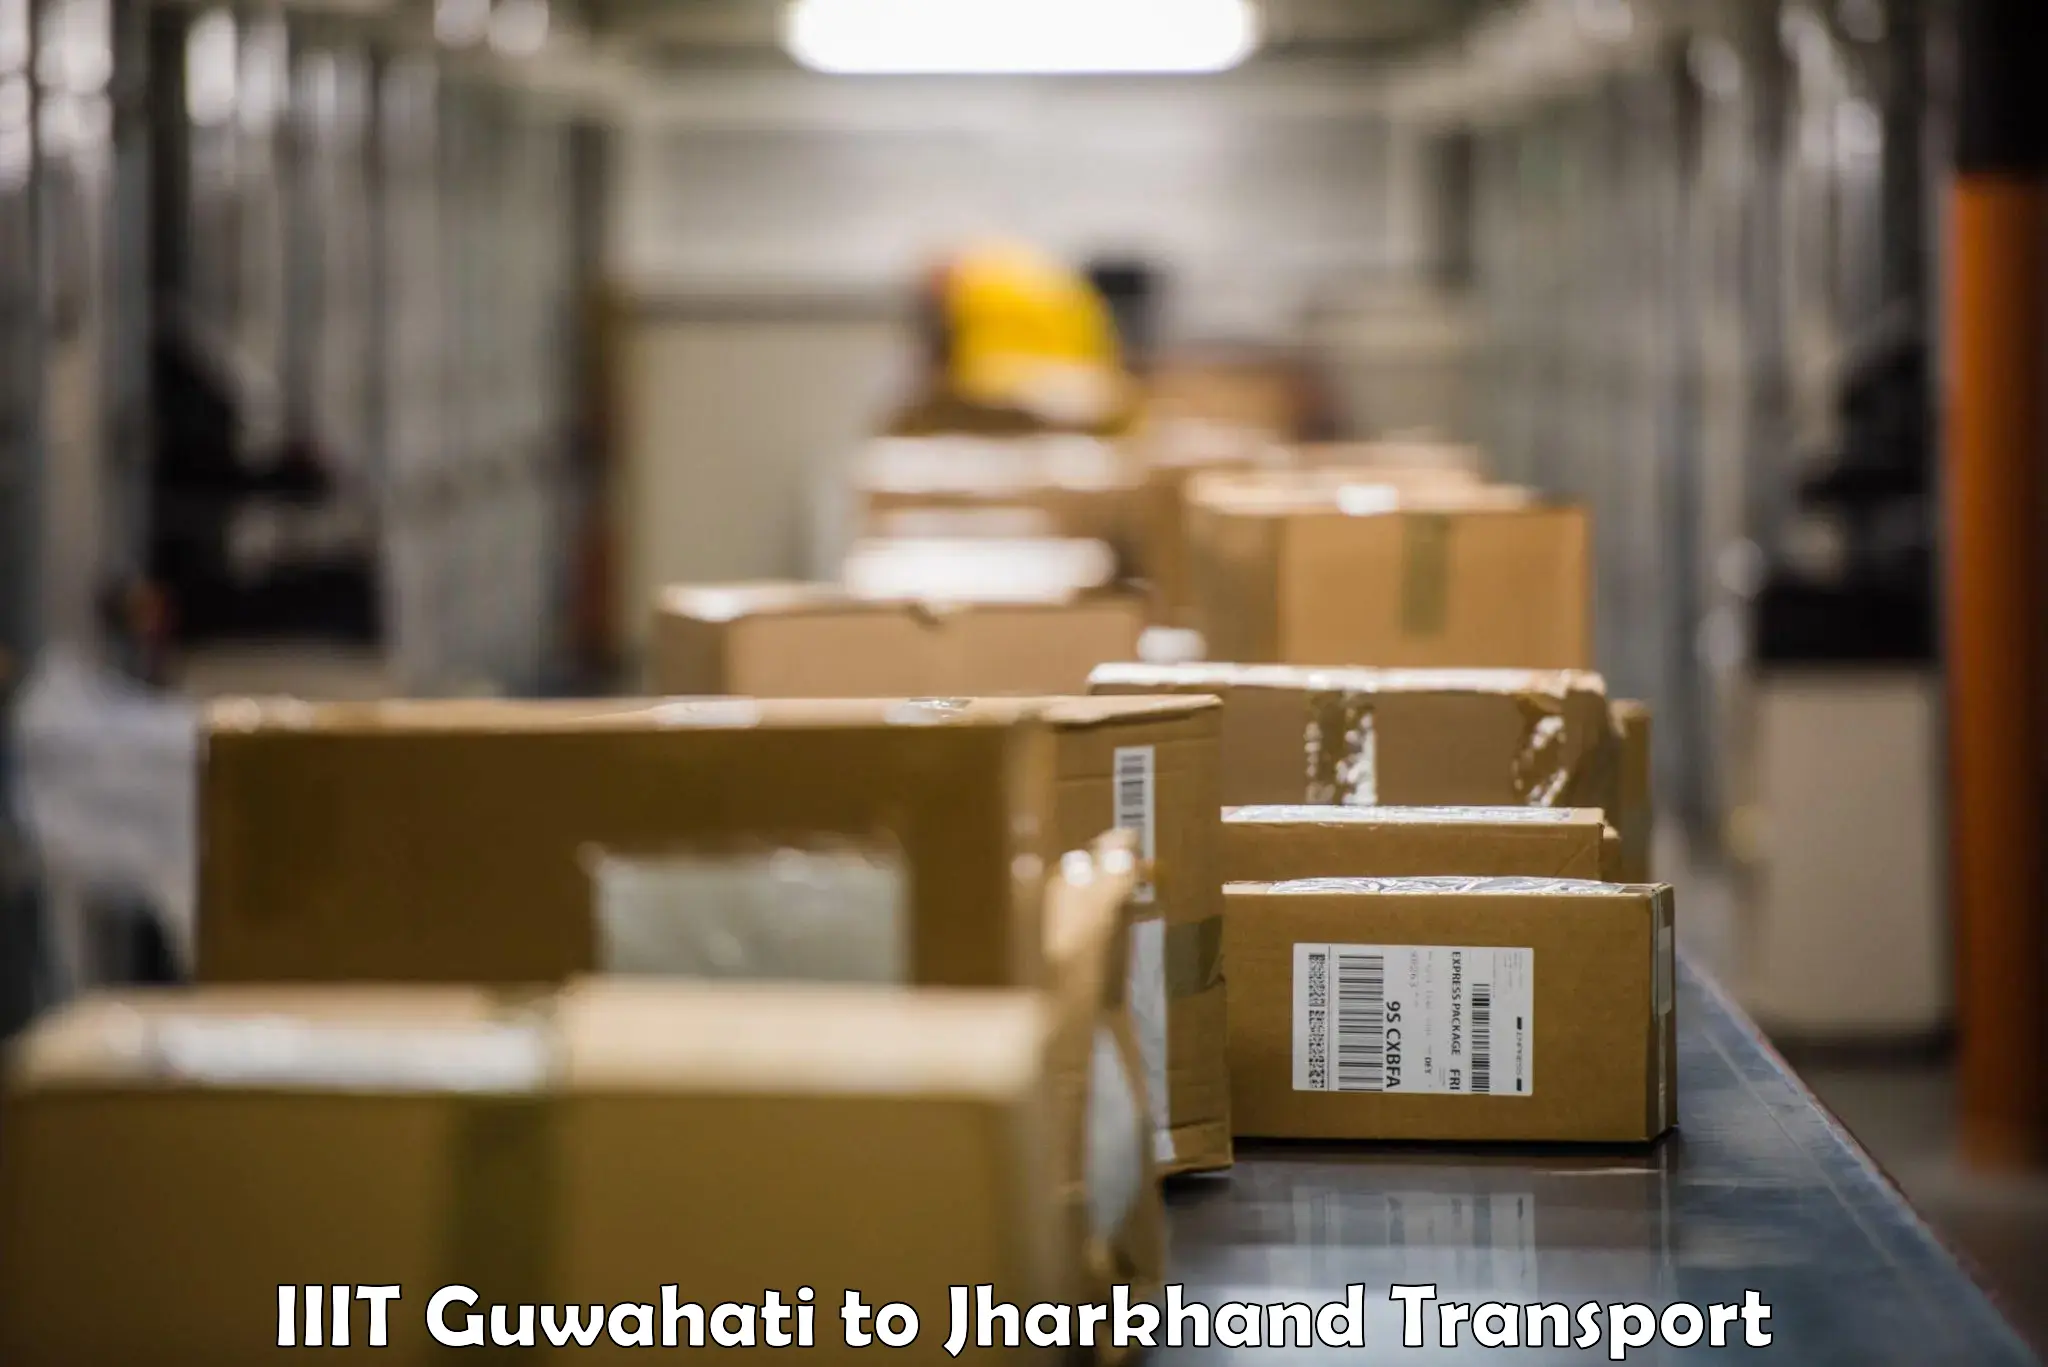 Cargo transportation services in IIIT Guwahati to Ranchi